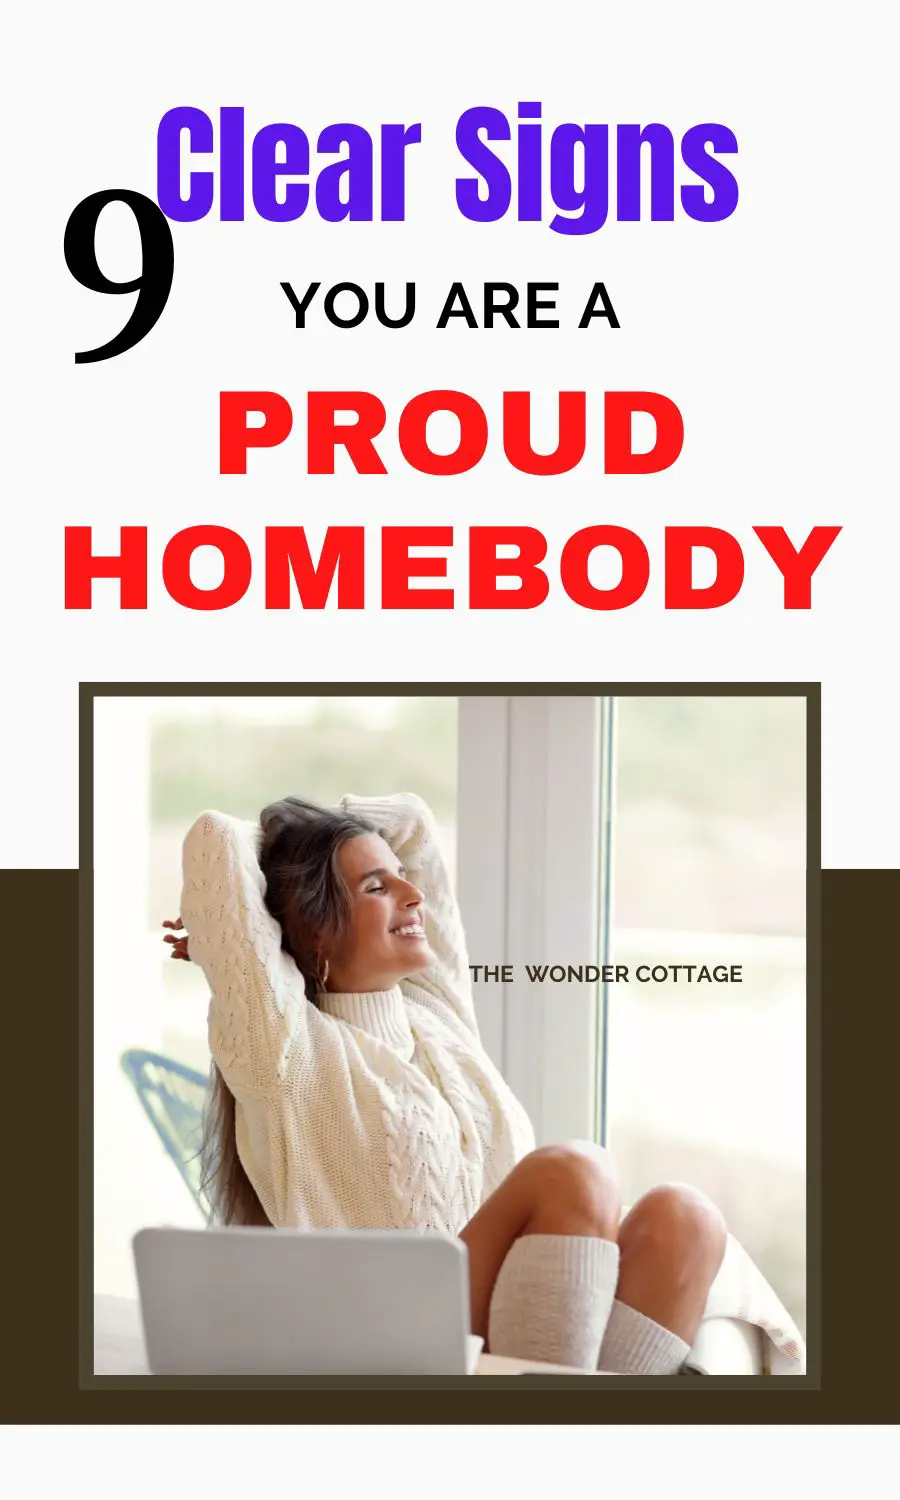 5 Clear Signs You Are a Proud Homebody